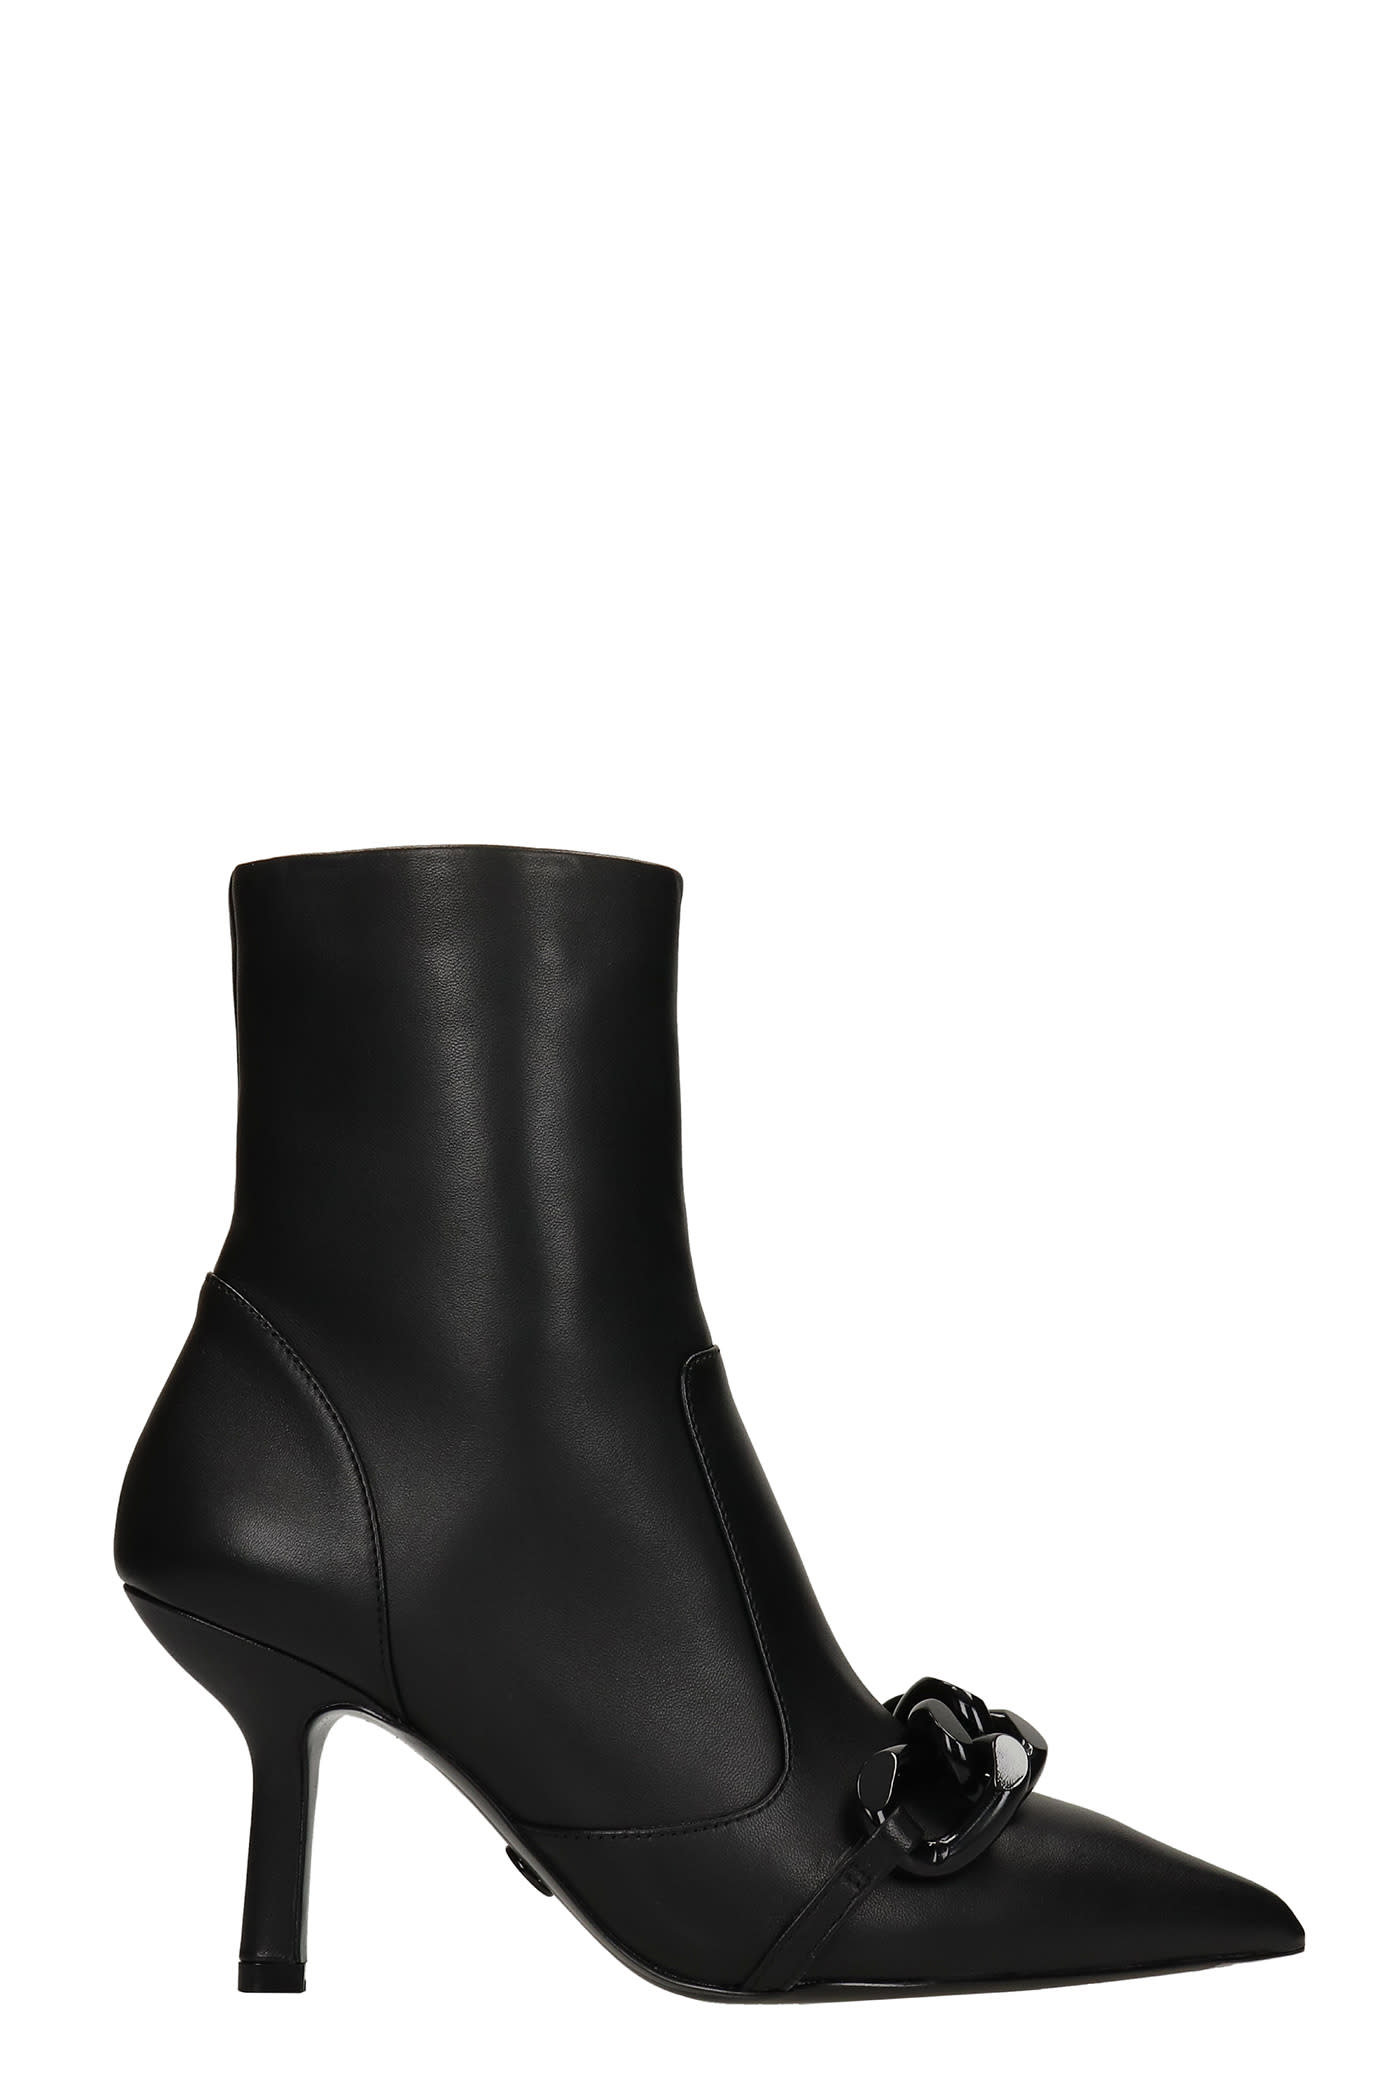 Michael Kors Scarlett High Heels Ankle Boots In Black Leather